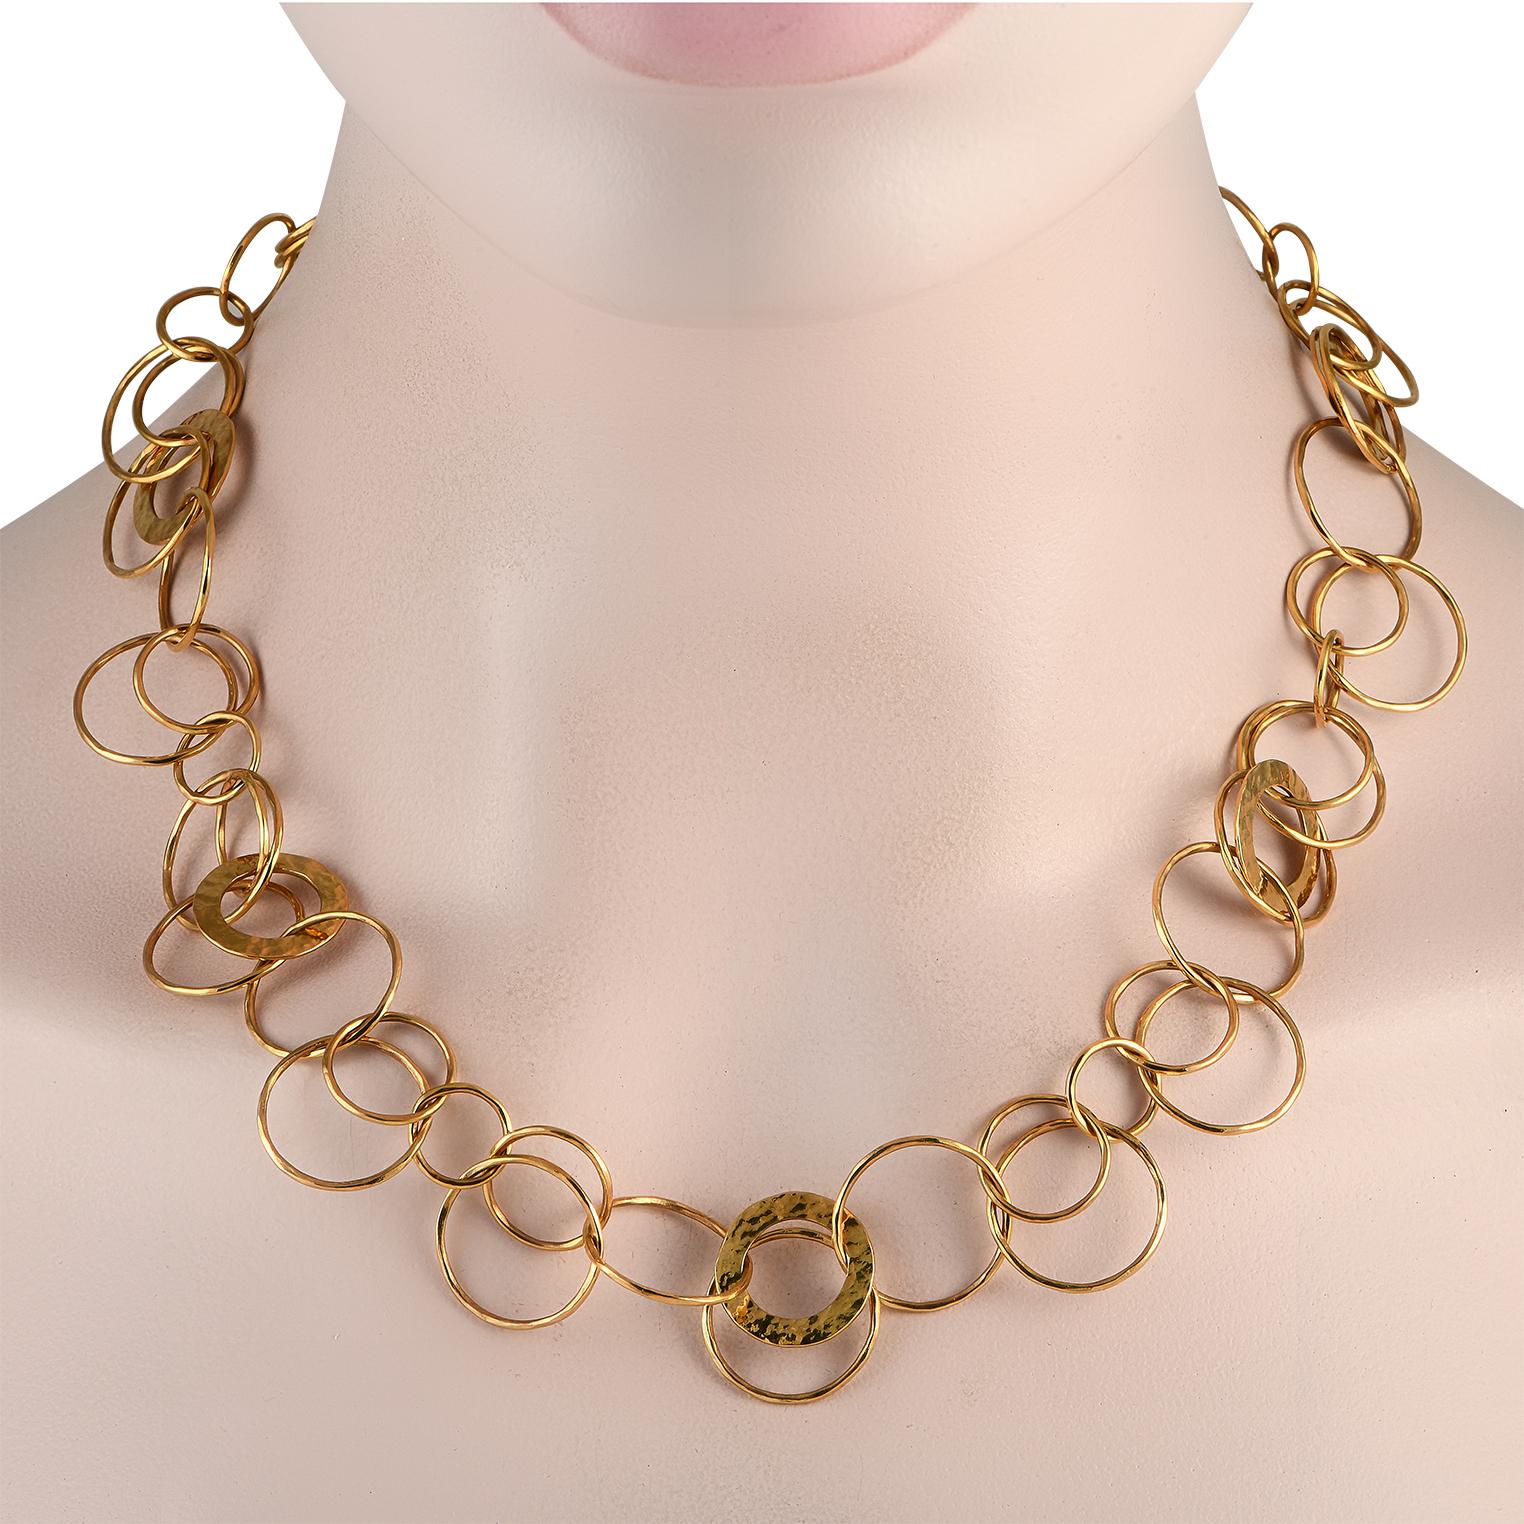 A series of 18K Yellow Gold links combine to create this artistic Ippolita necklace. Incredibly bold, this necklace measures 20 long and comes complete with secure lobster clasp closure.This jewelry piece is offered in estate condition and includes